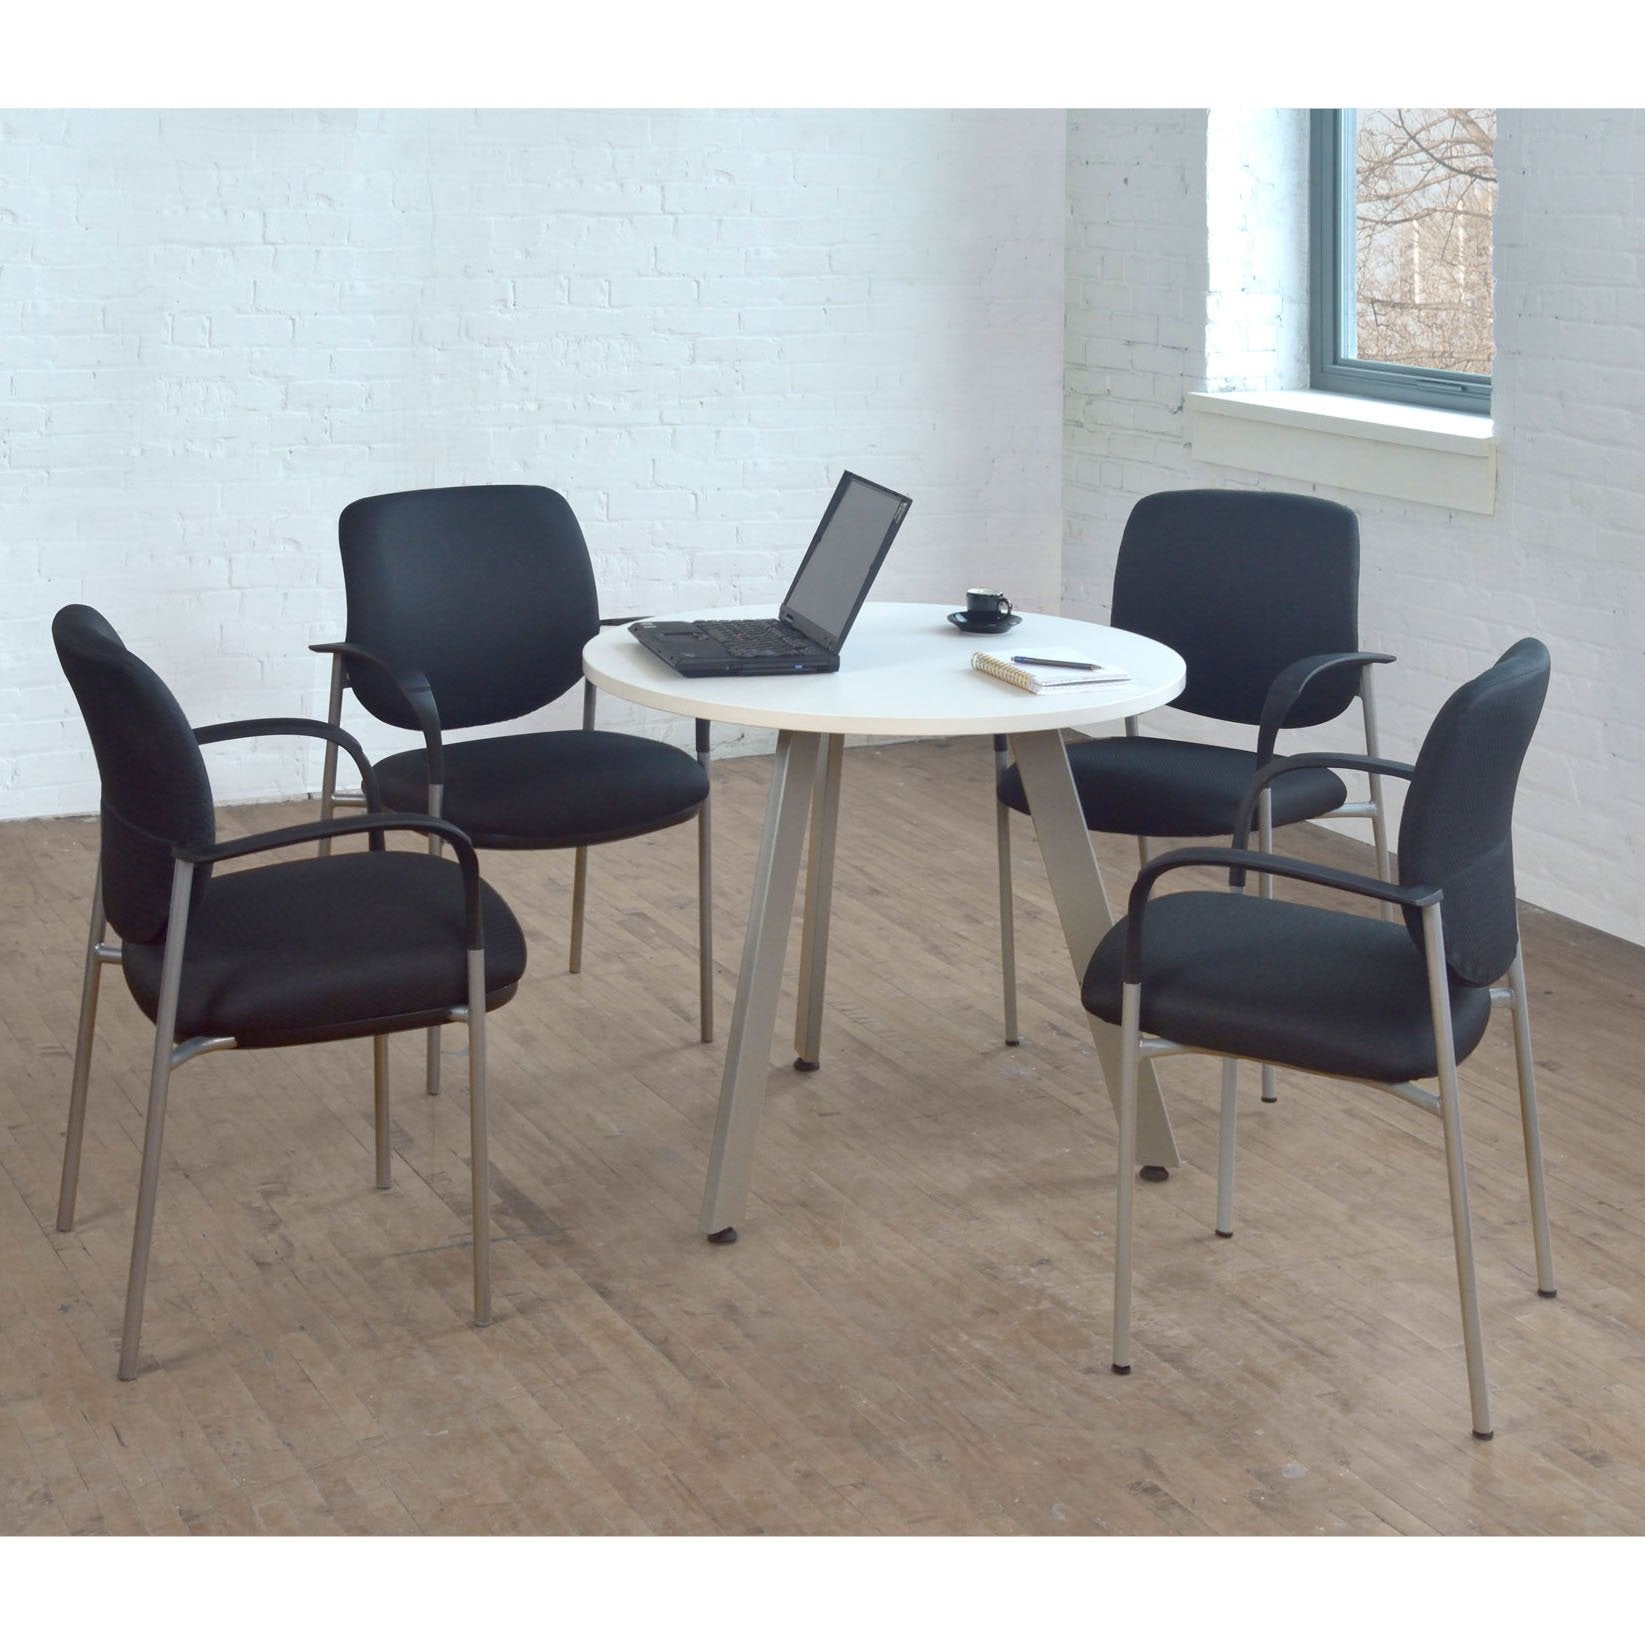 Multi-Purpose Table for co-working